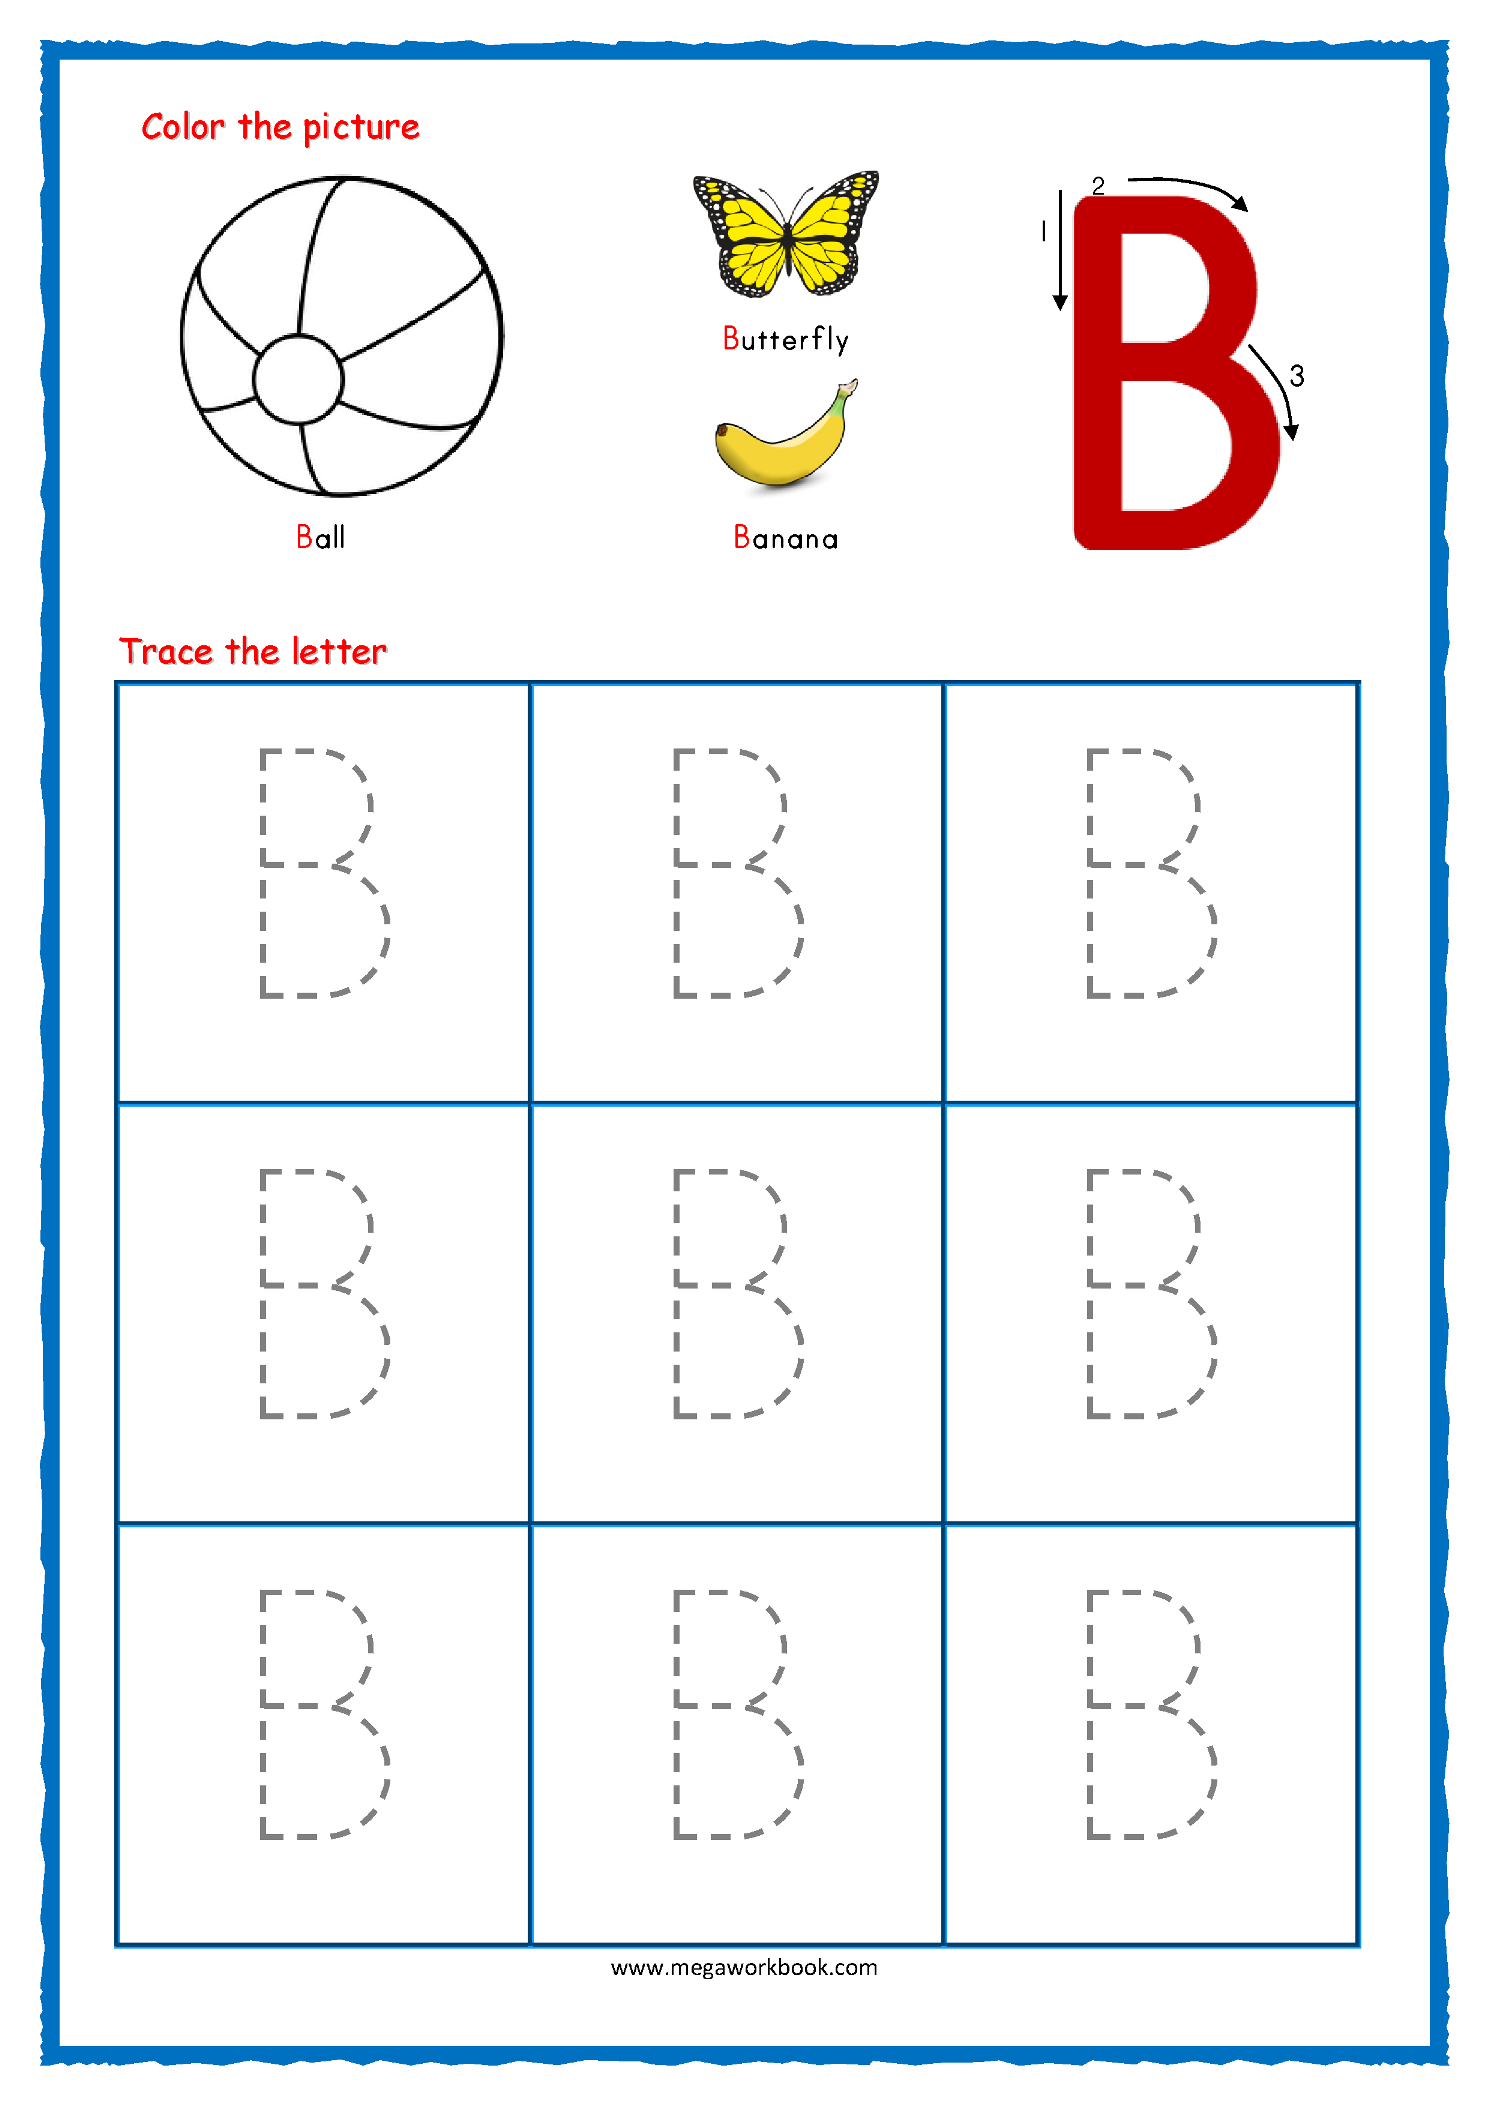 Coloring Book : Letter Tracingts Free Printable Coloring inside A Letter Tracing Worksheet